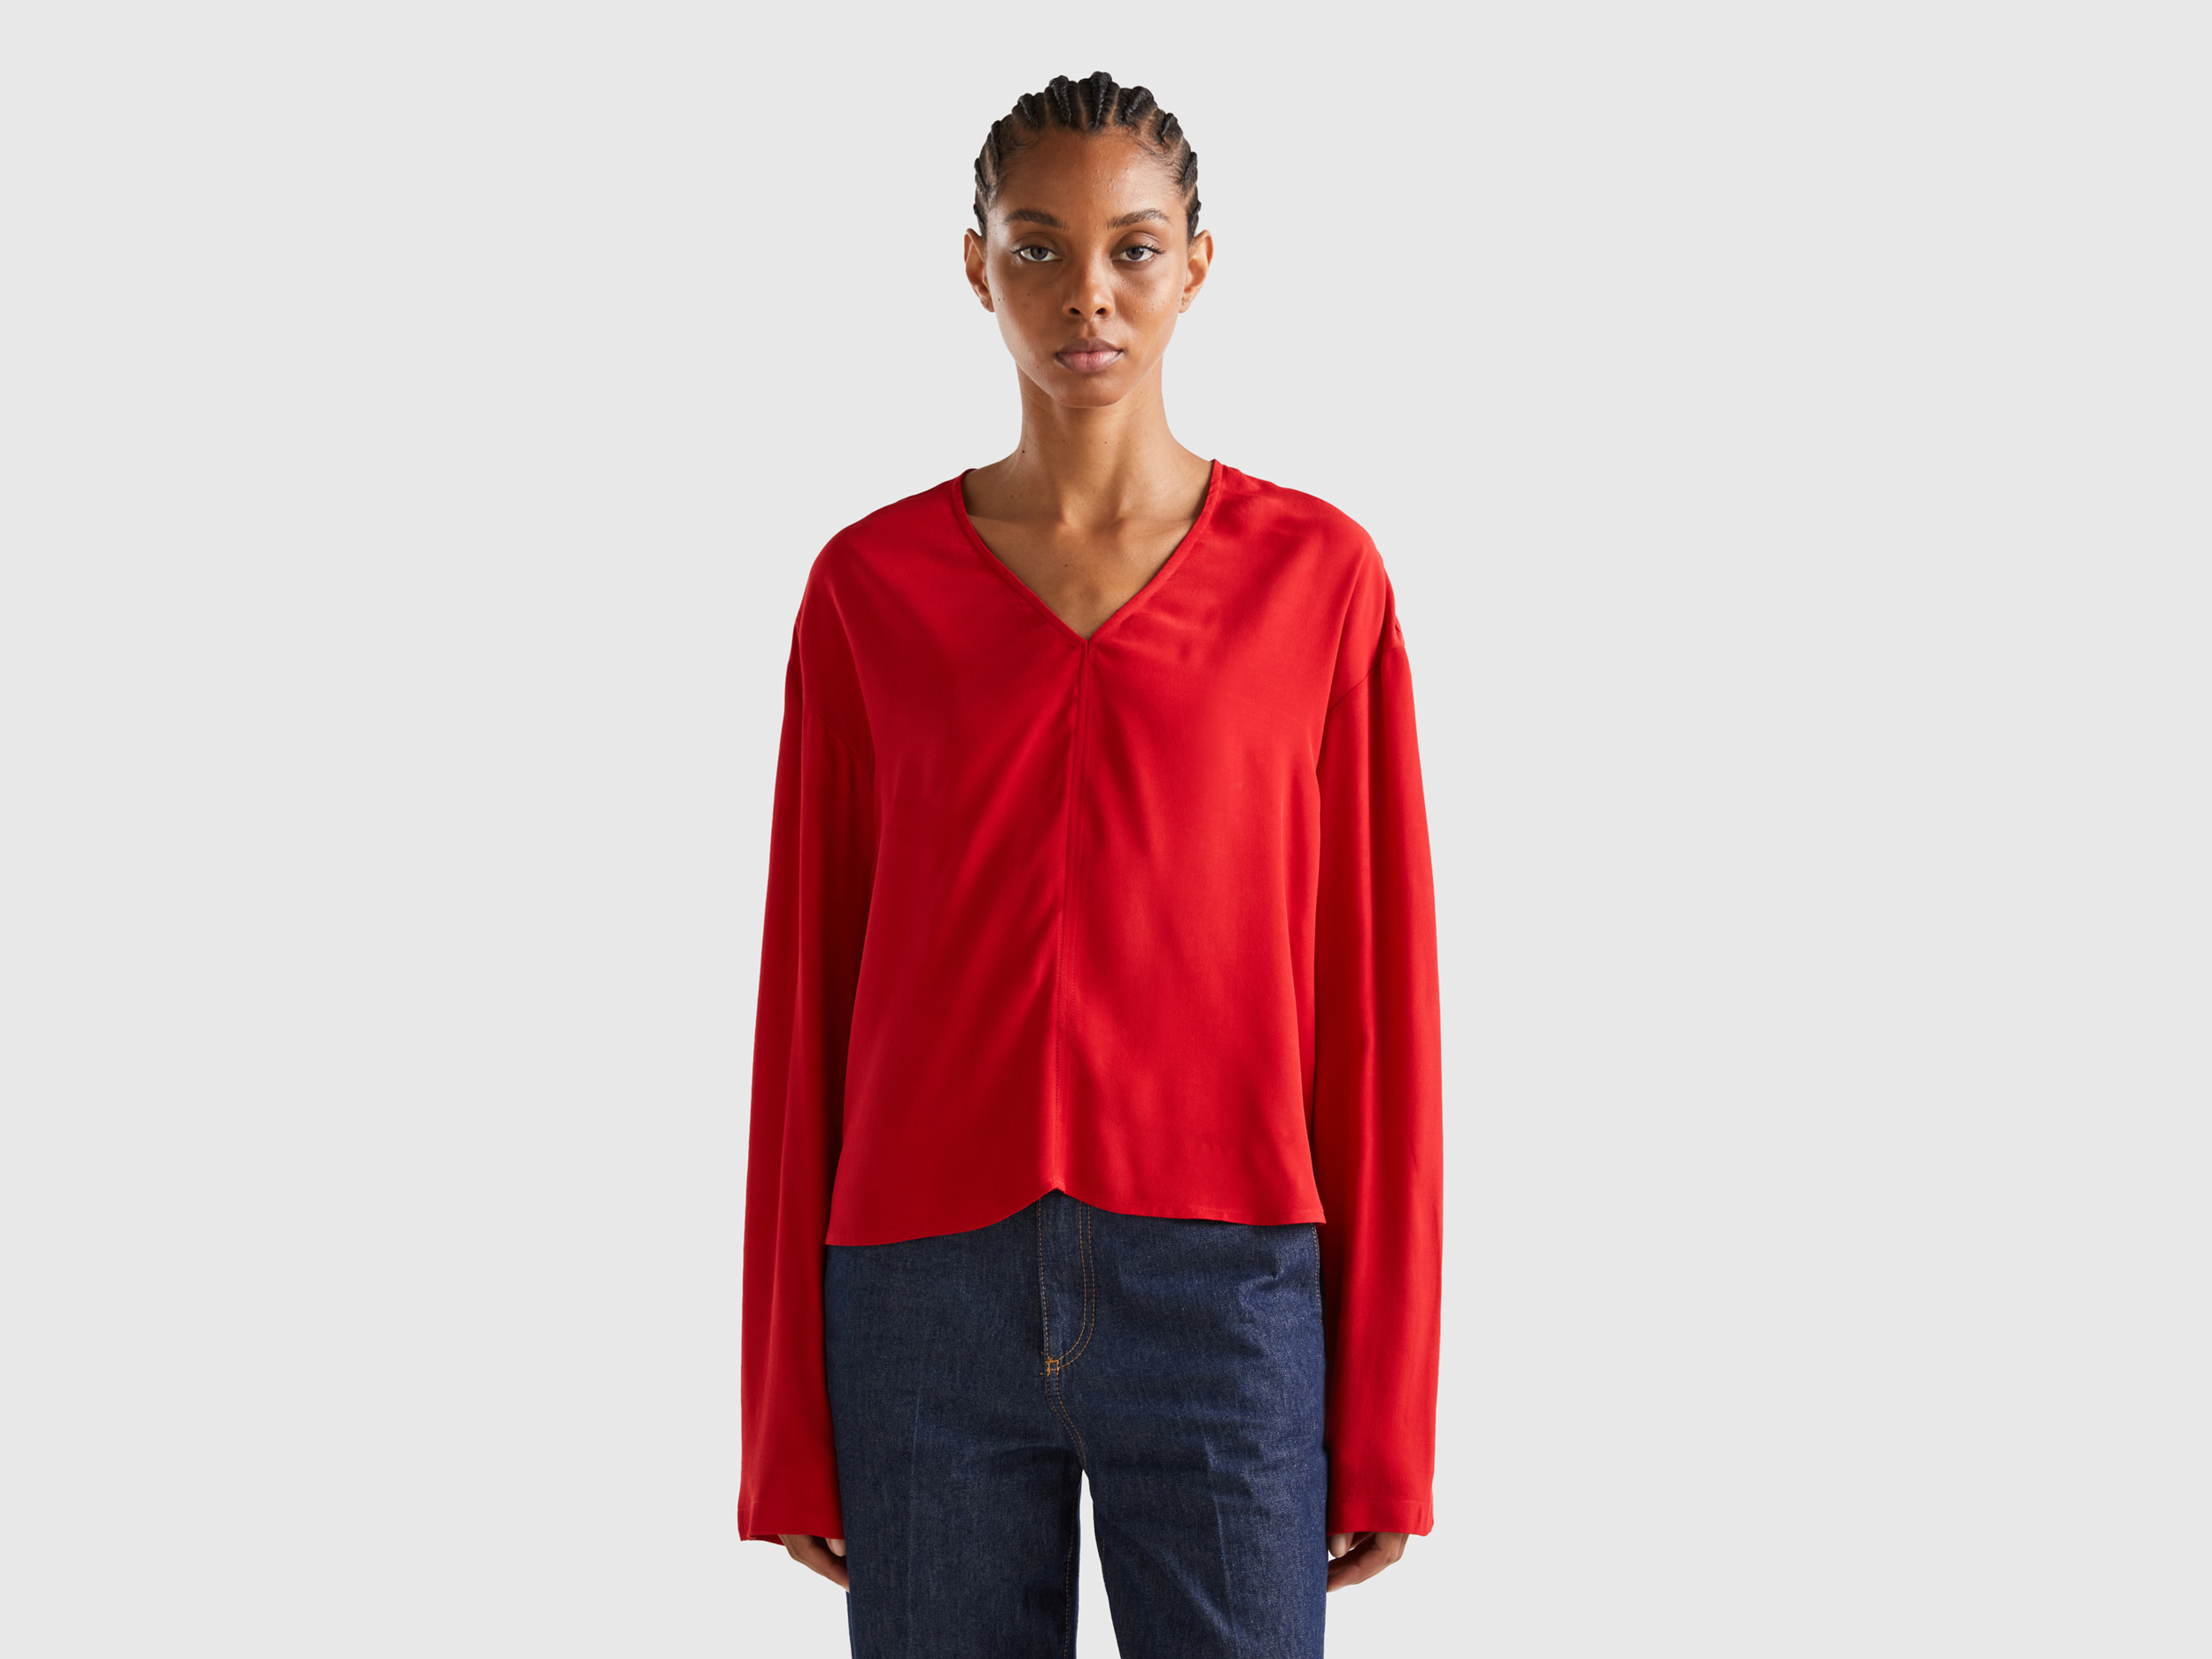 Benetton, Blouse With V-neck, size XS, Red, Women